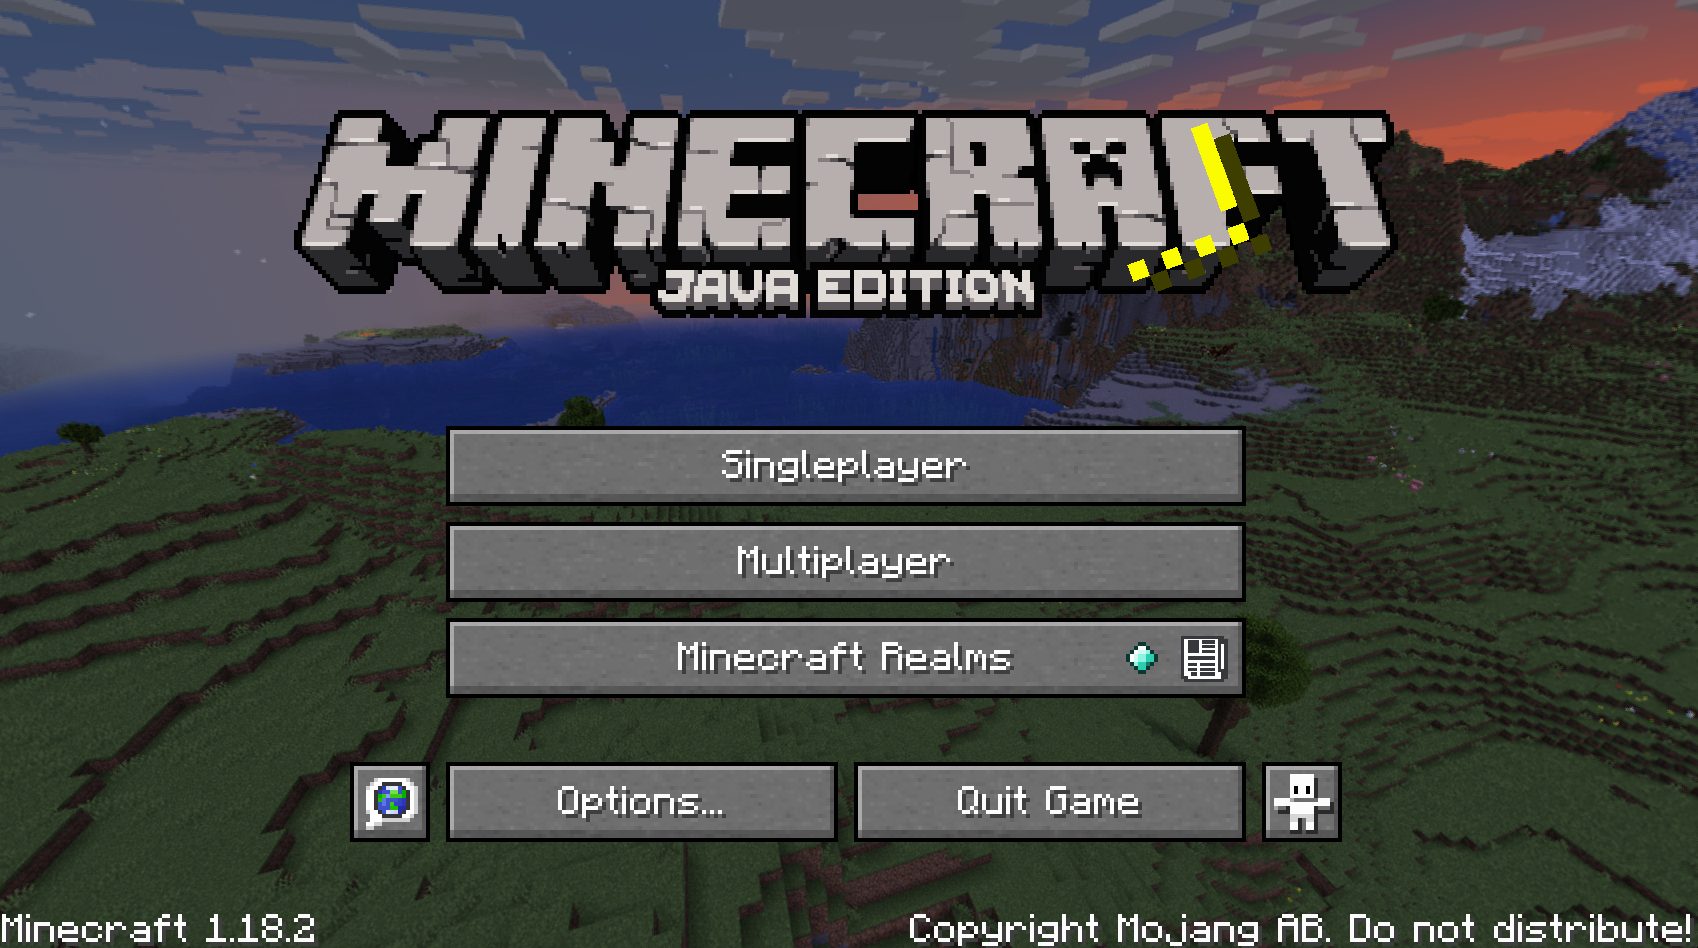 Launch your Minecraft client and select Multiplayer.